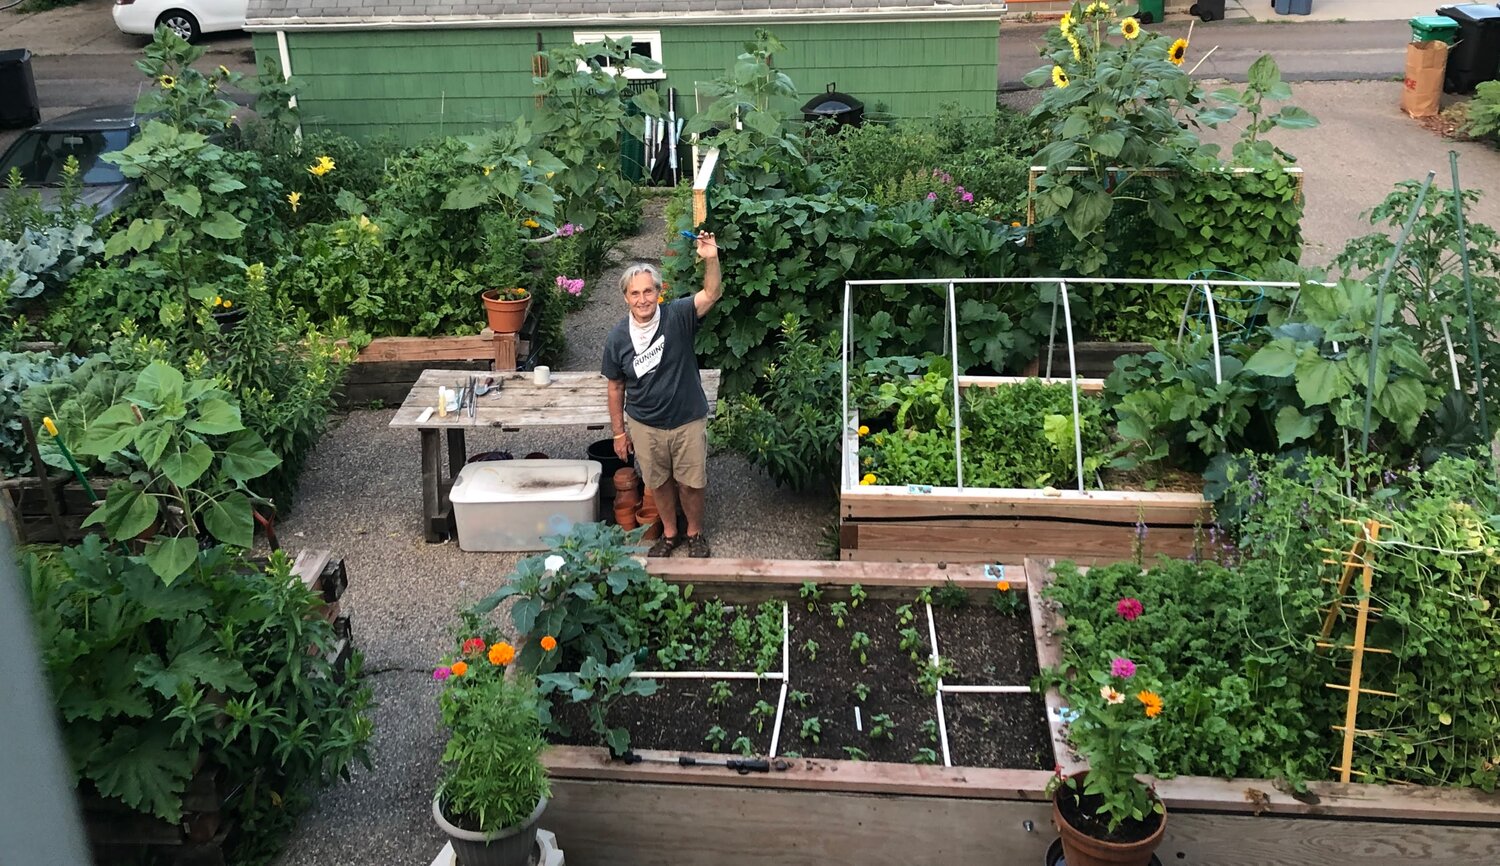 Craig Neal stands in the urban garden growing on his city plot that feeds nine neighboring families.